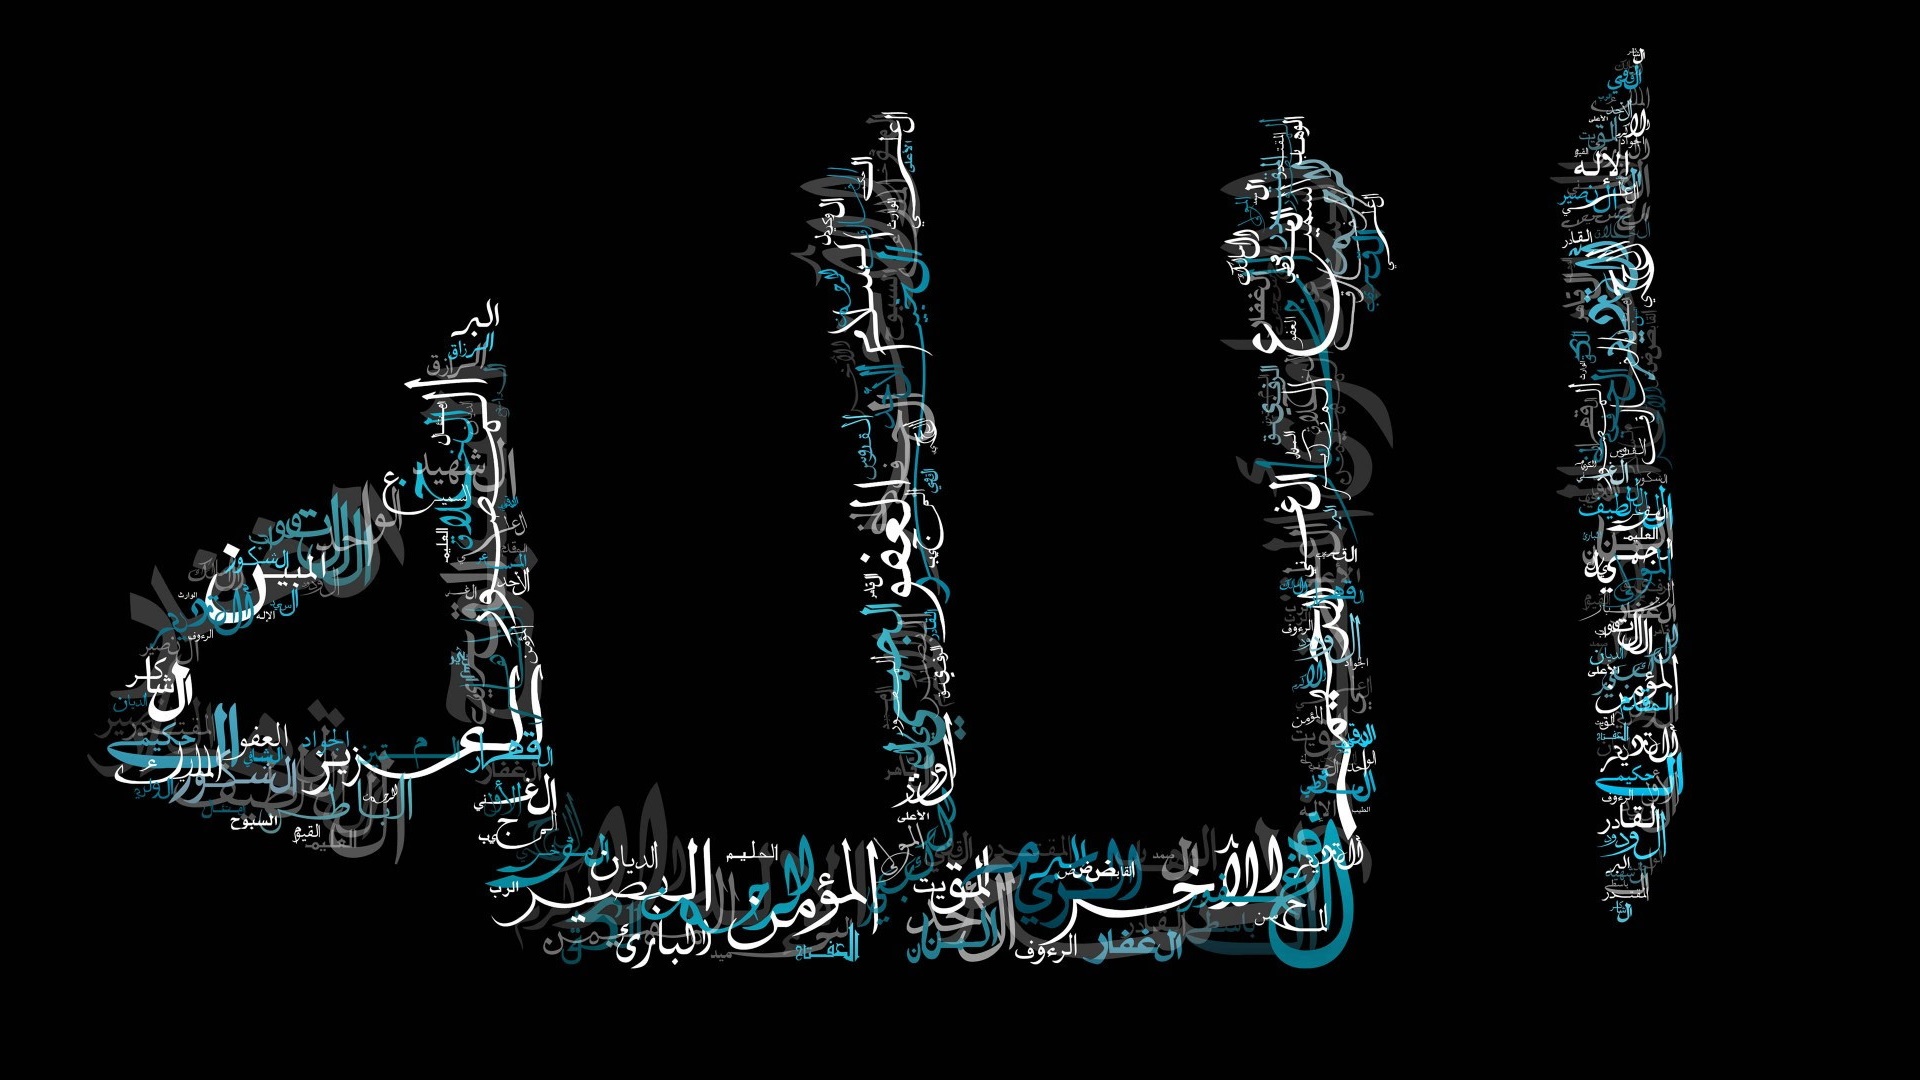 Allah Macbook Backgrounds HD with high-resolution 1920x1080 pixel. You can use and set as wallpaper for Notebook Screensavers, Mac Wallpapers, Mobile Home Screen, iPhone or Android Phones Lock Screen